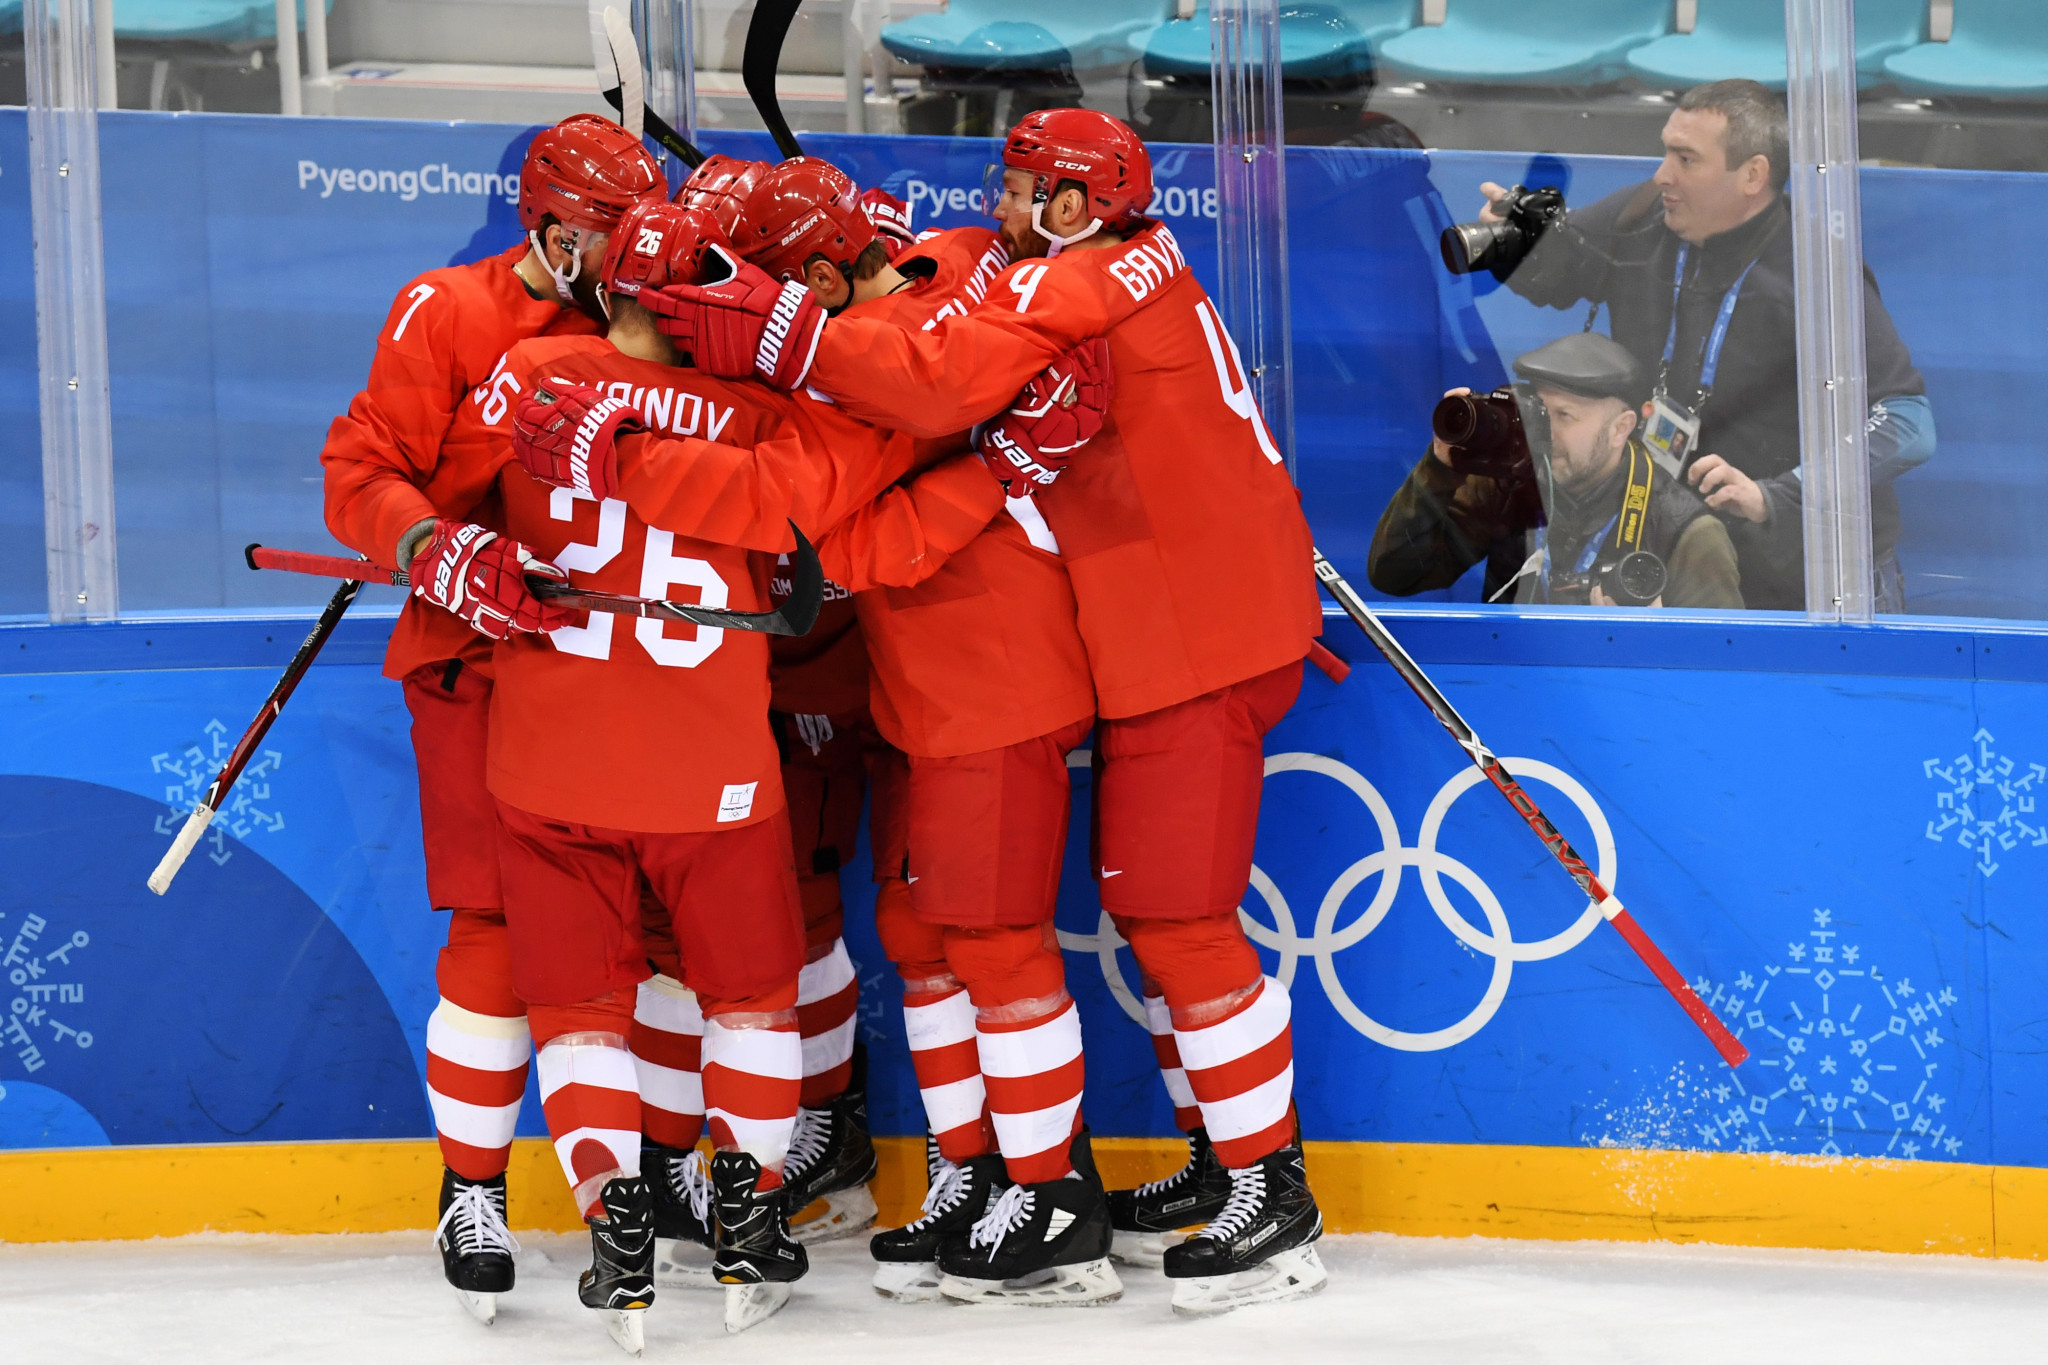 Seven members of the Pyeongchang 2018 gold medal winning team will feature for the ROC in Beijing ©Getty Images